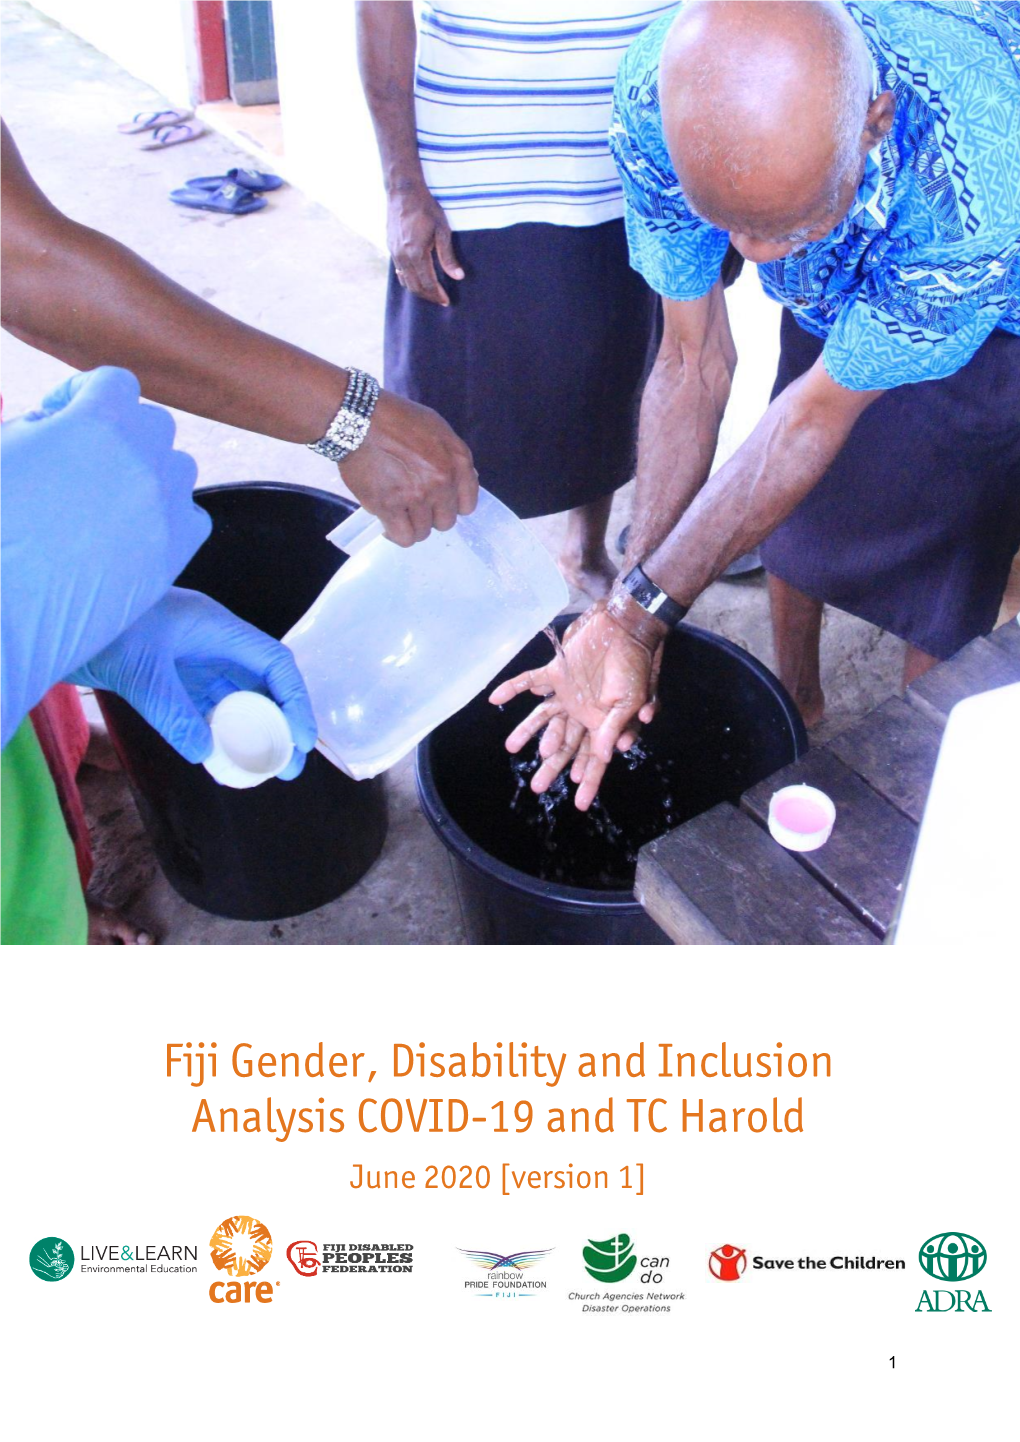 Fiji Gender, Disability and Inclusion Analysis COVID-19 and TC Harold June 2020 [Version 1]